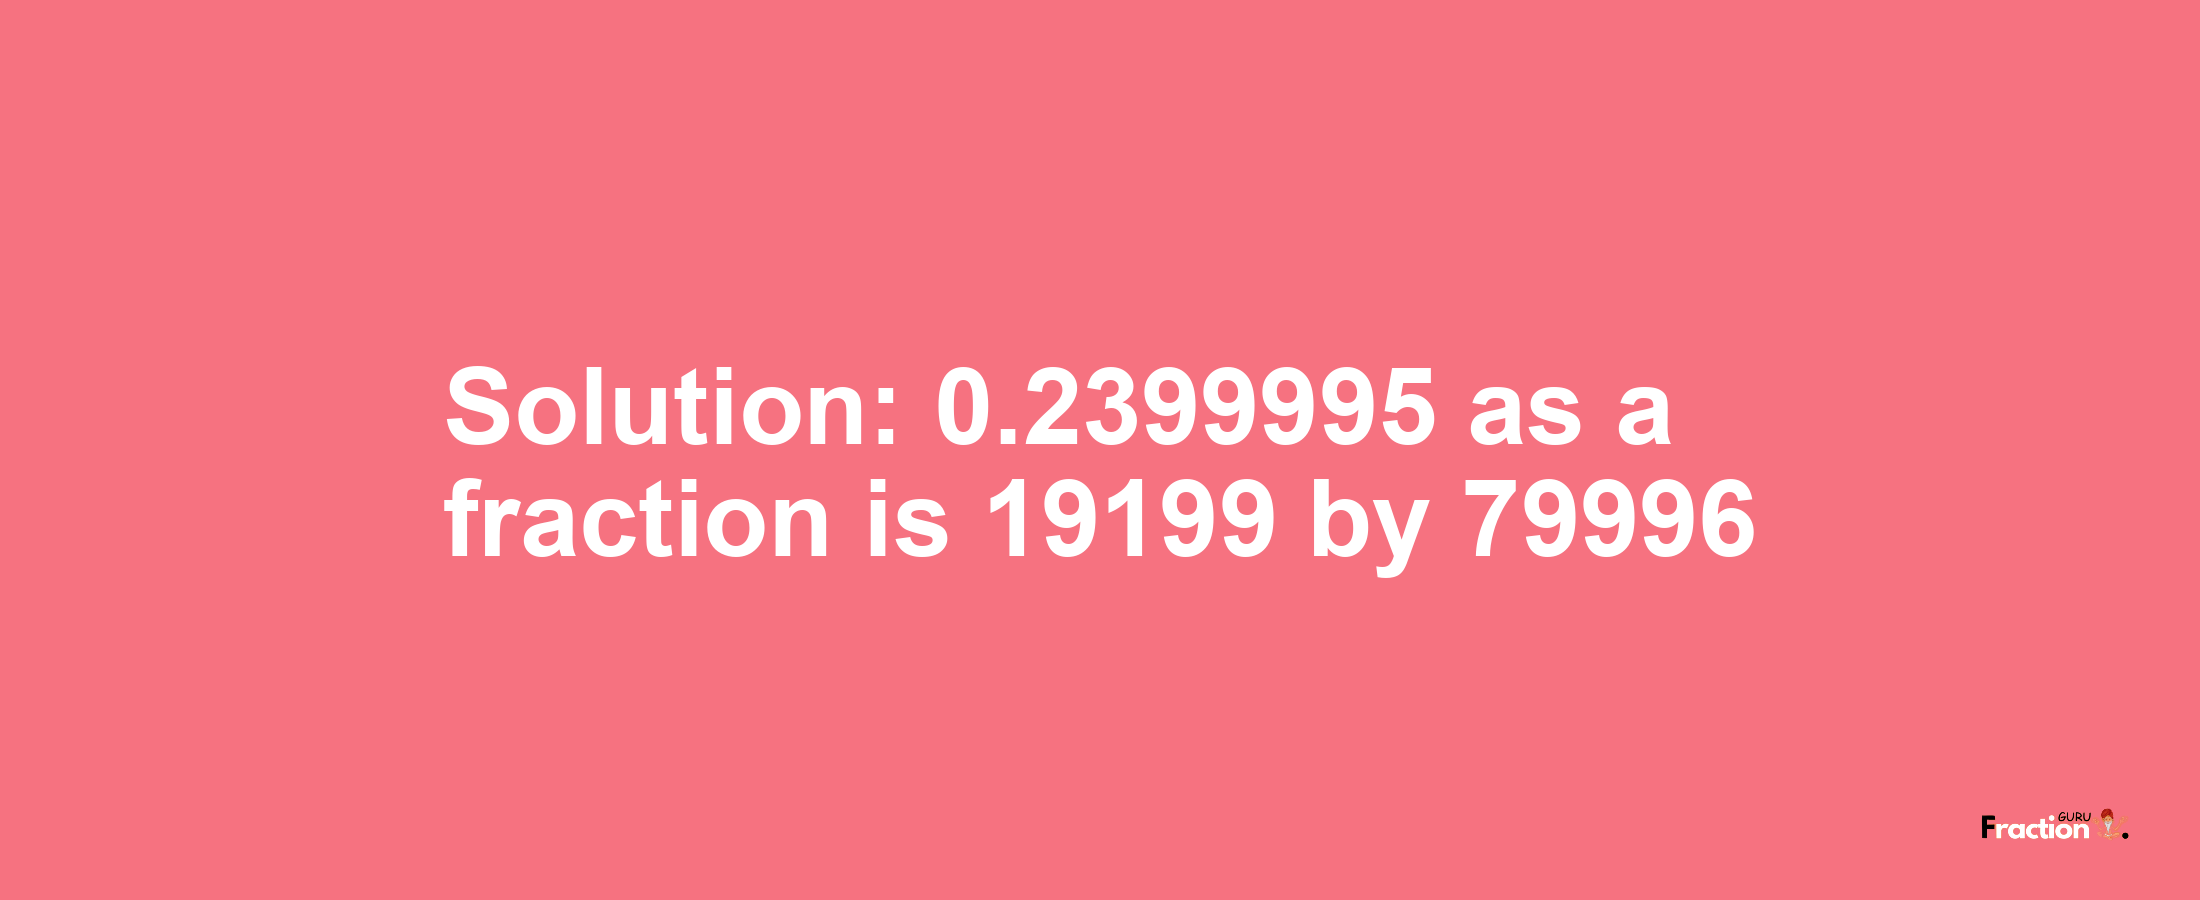 Solution:0.2399995 as a fraction is 19199/79996